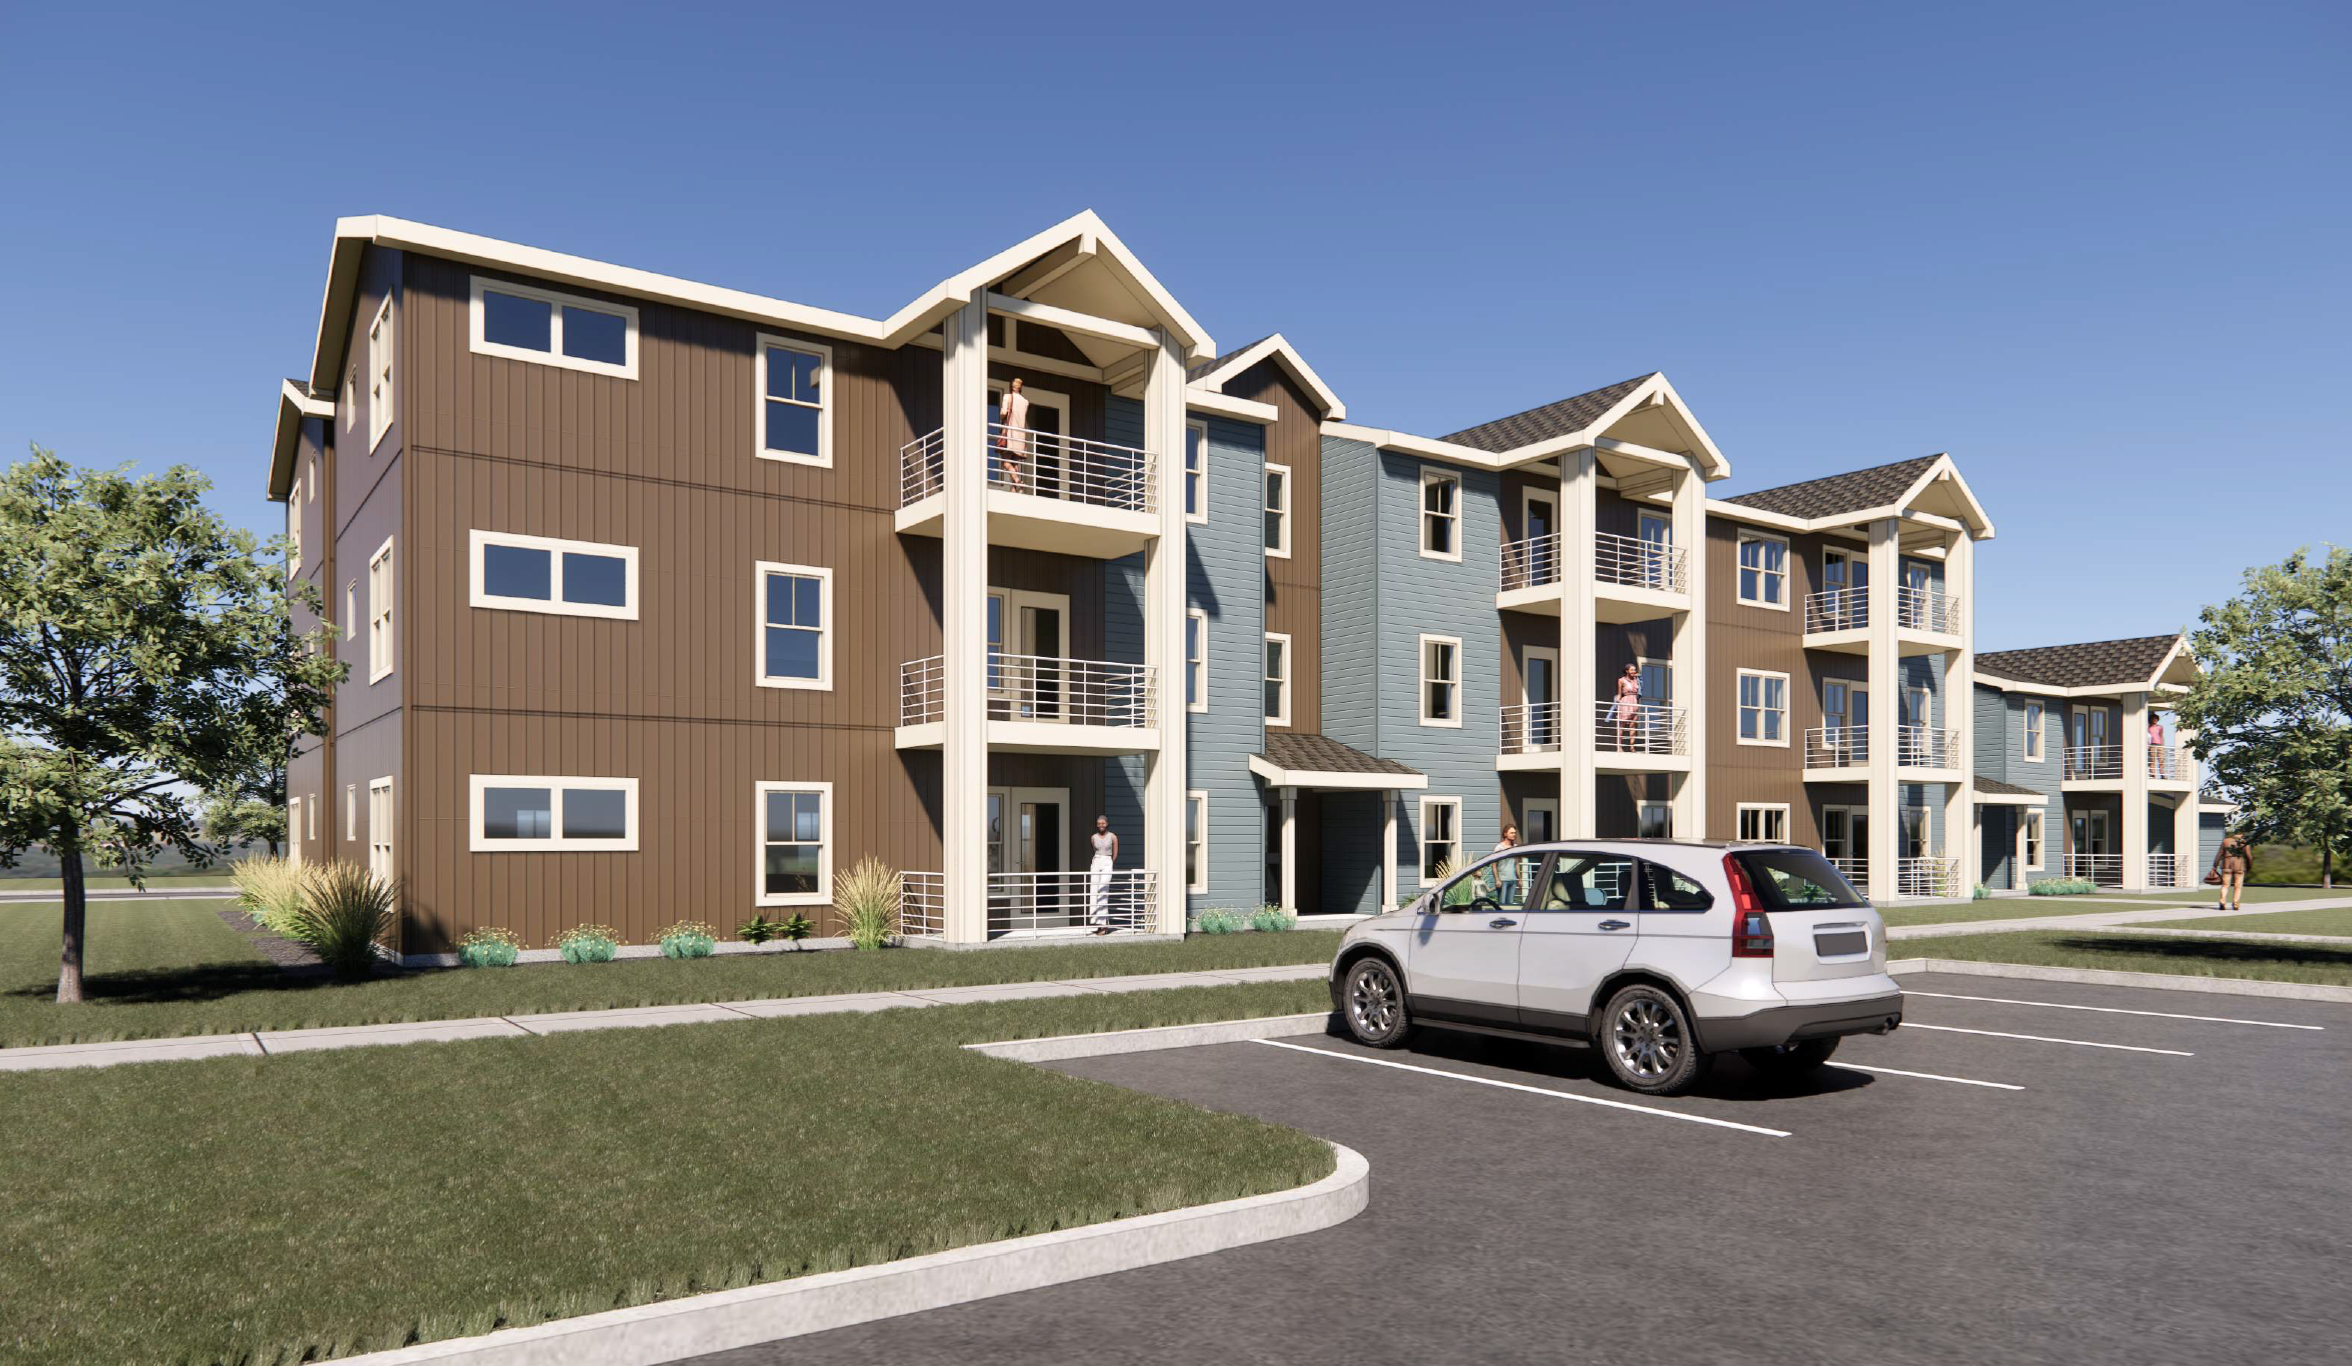 Rendering of Pacific Flats, an all-new affordable housing community in Phoenix, Ore.